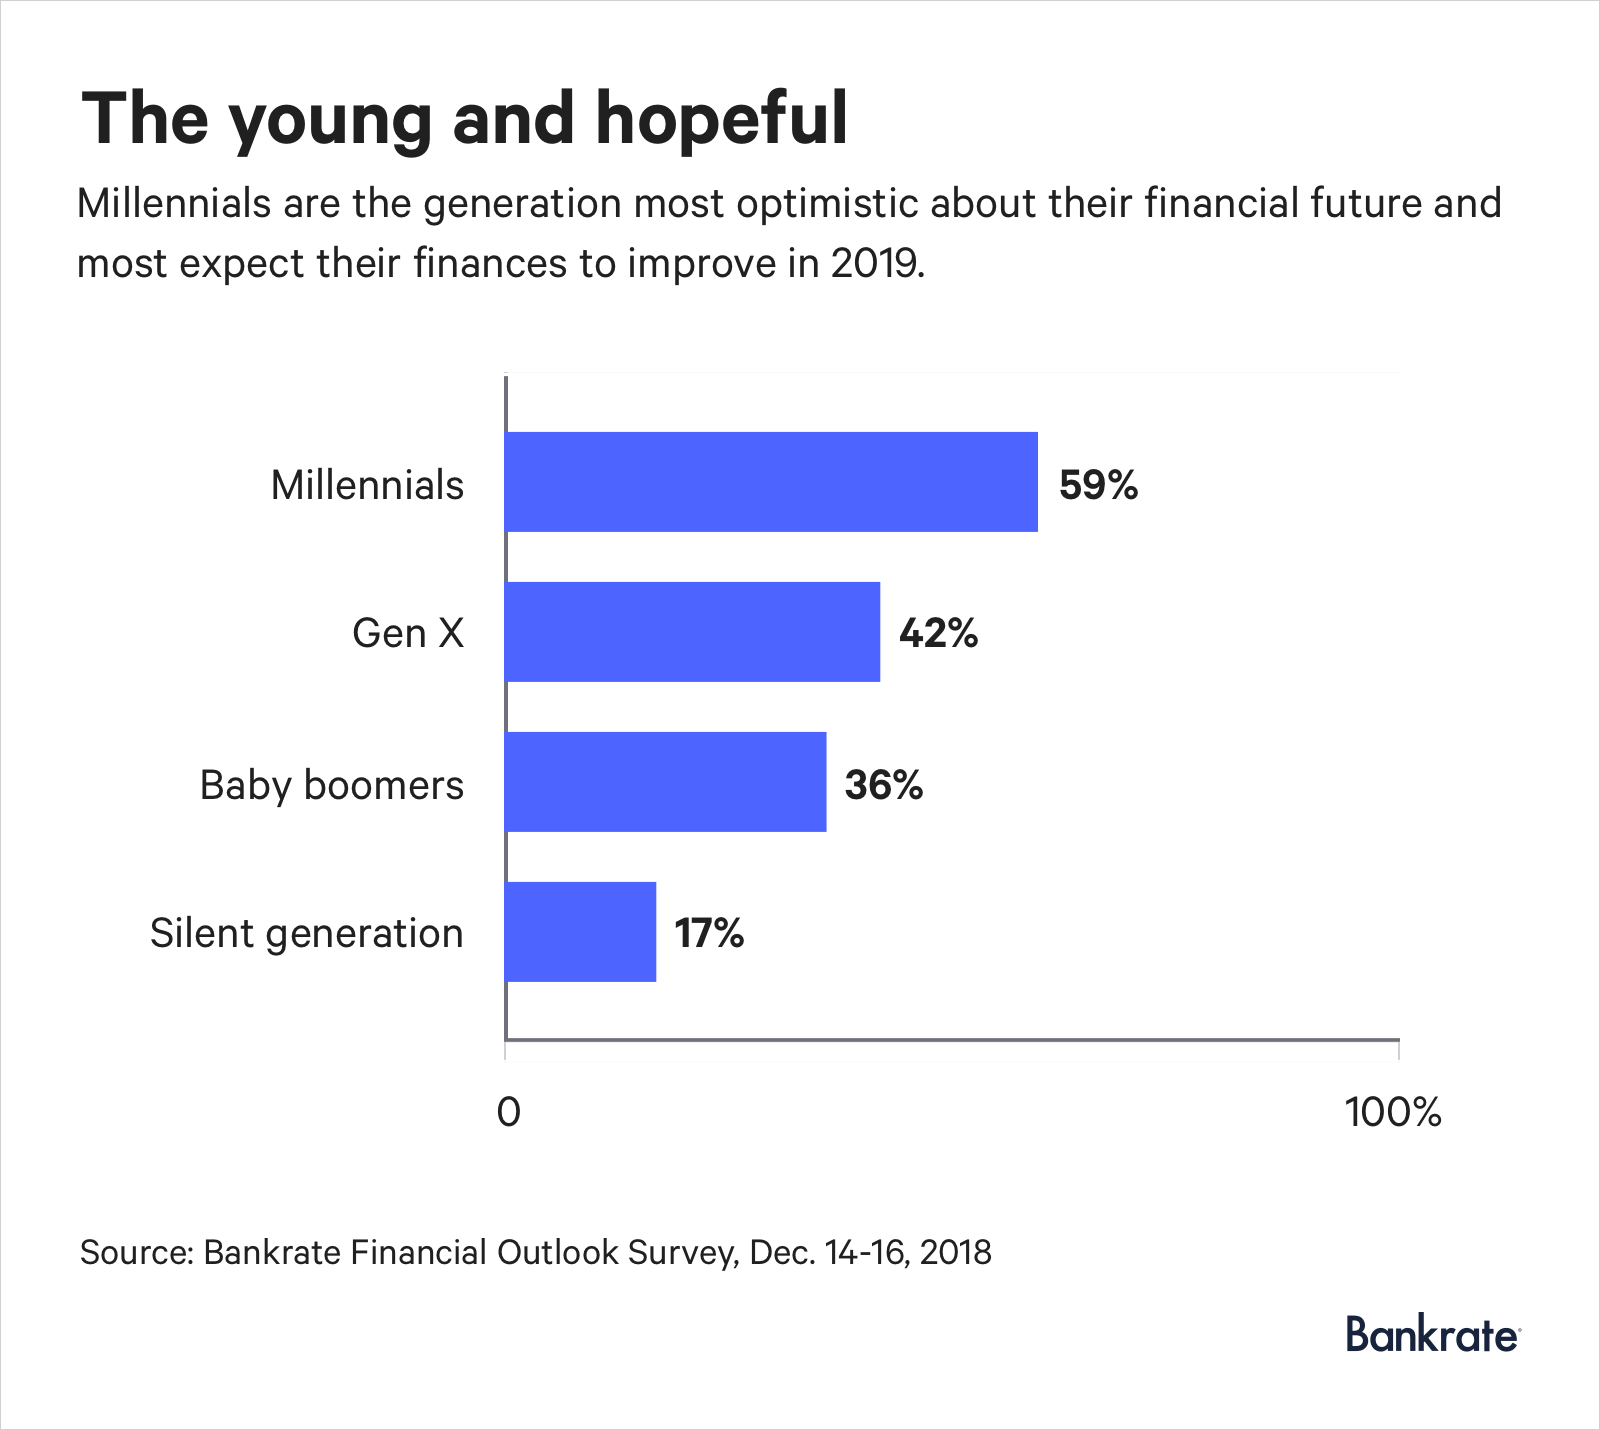 Graph: 59% of millennials are optimistic about their financial future in 2019